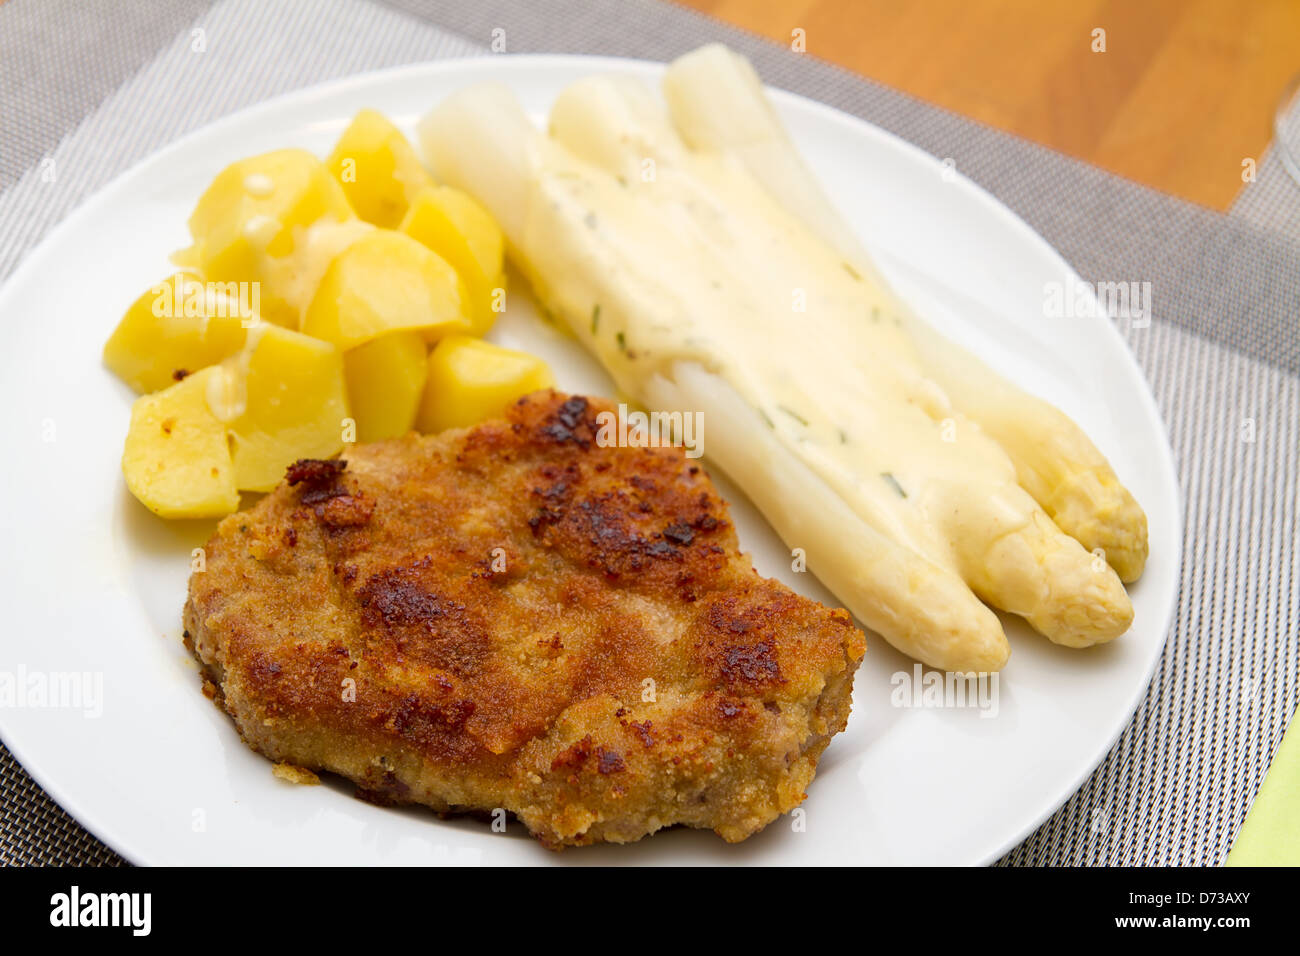 Escolope with white asparagus and potatoes Stock Photo